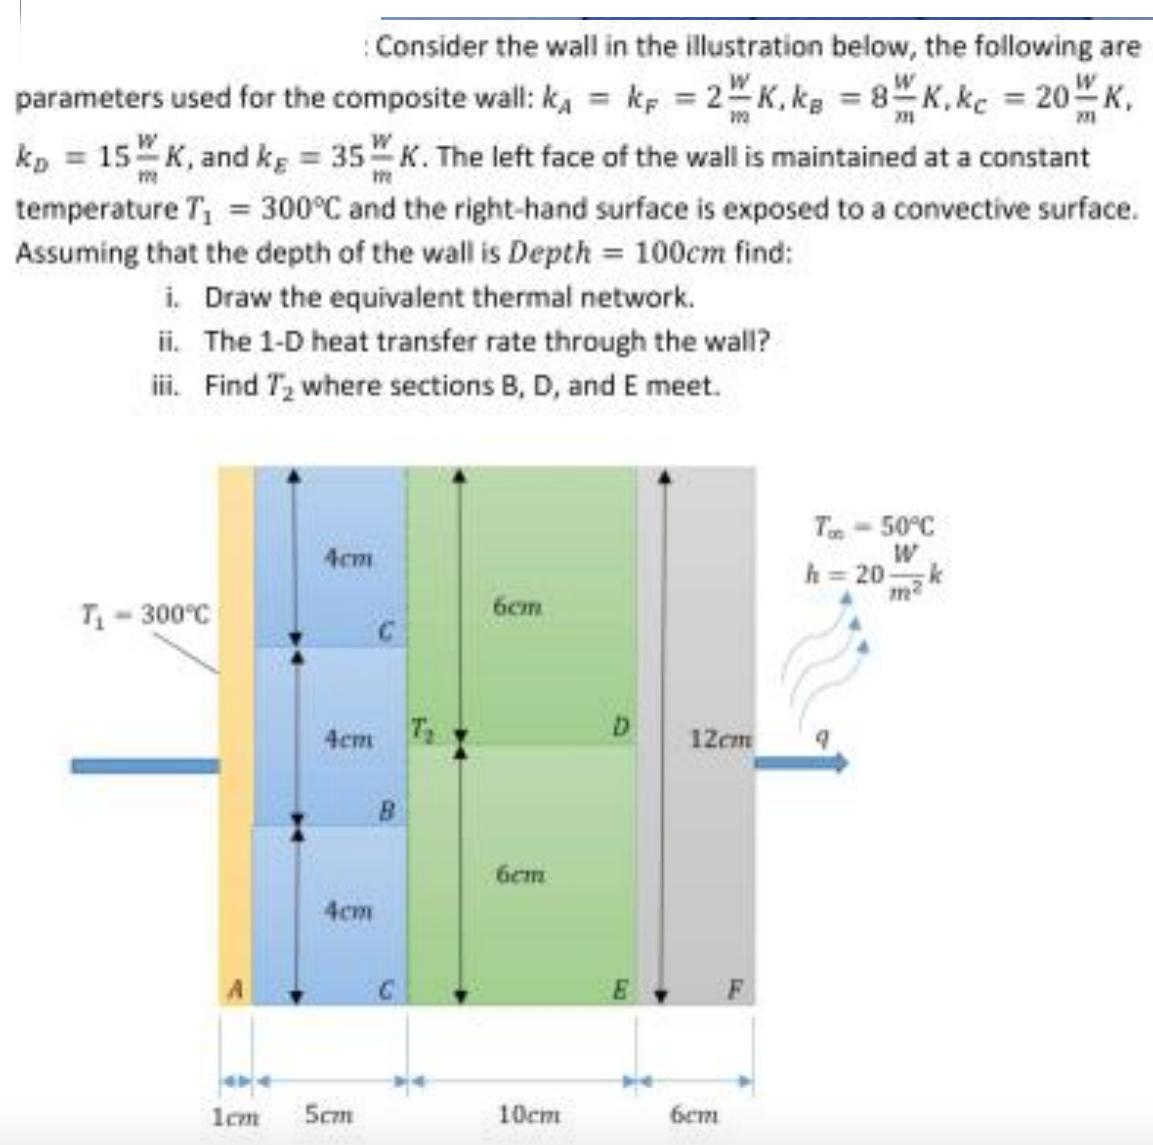 Consider the wall in the illustration below, the following are parameters used for the composite wall: k= kp